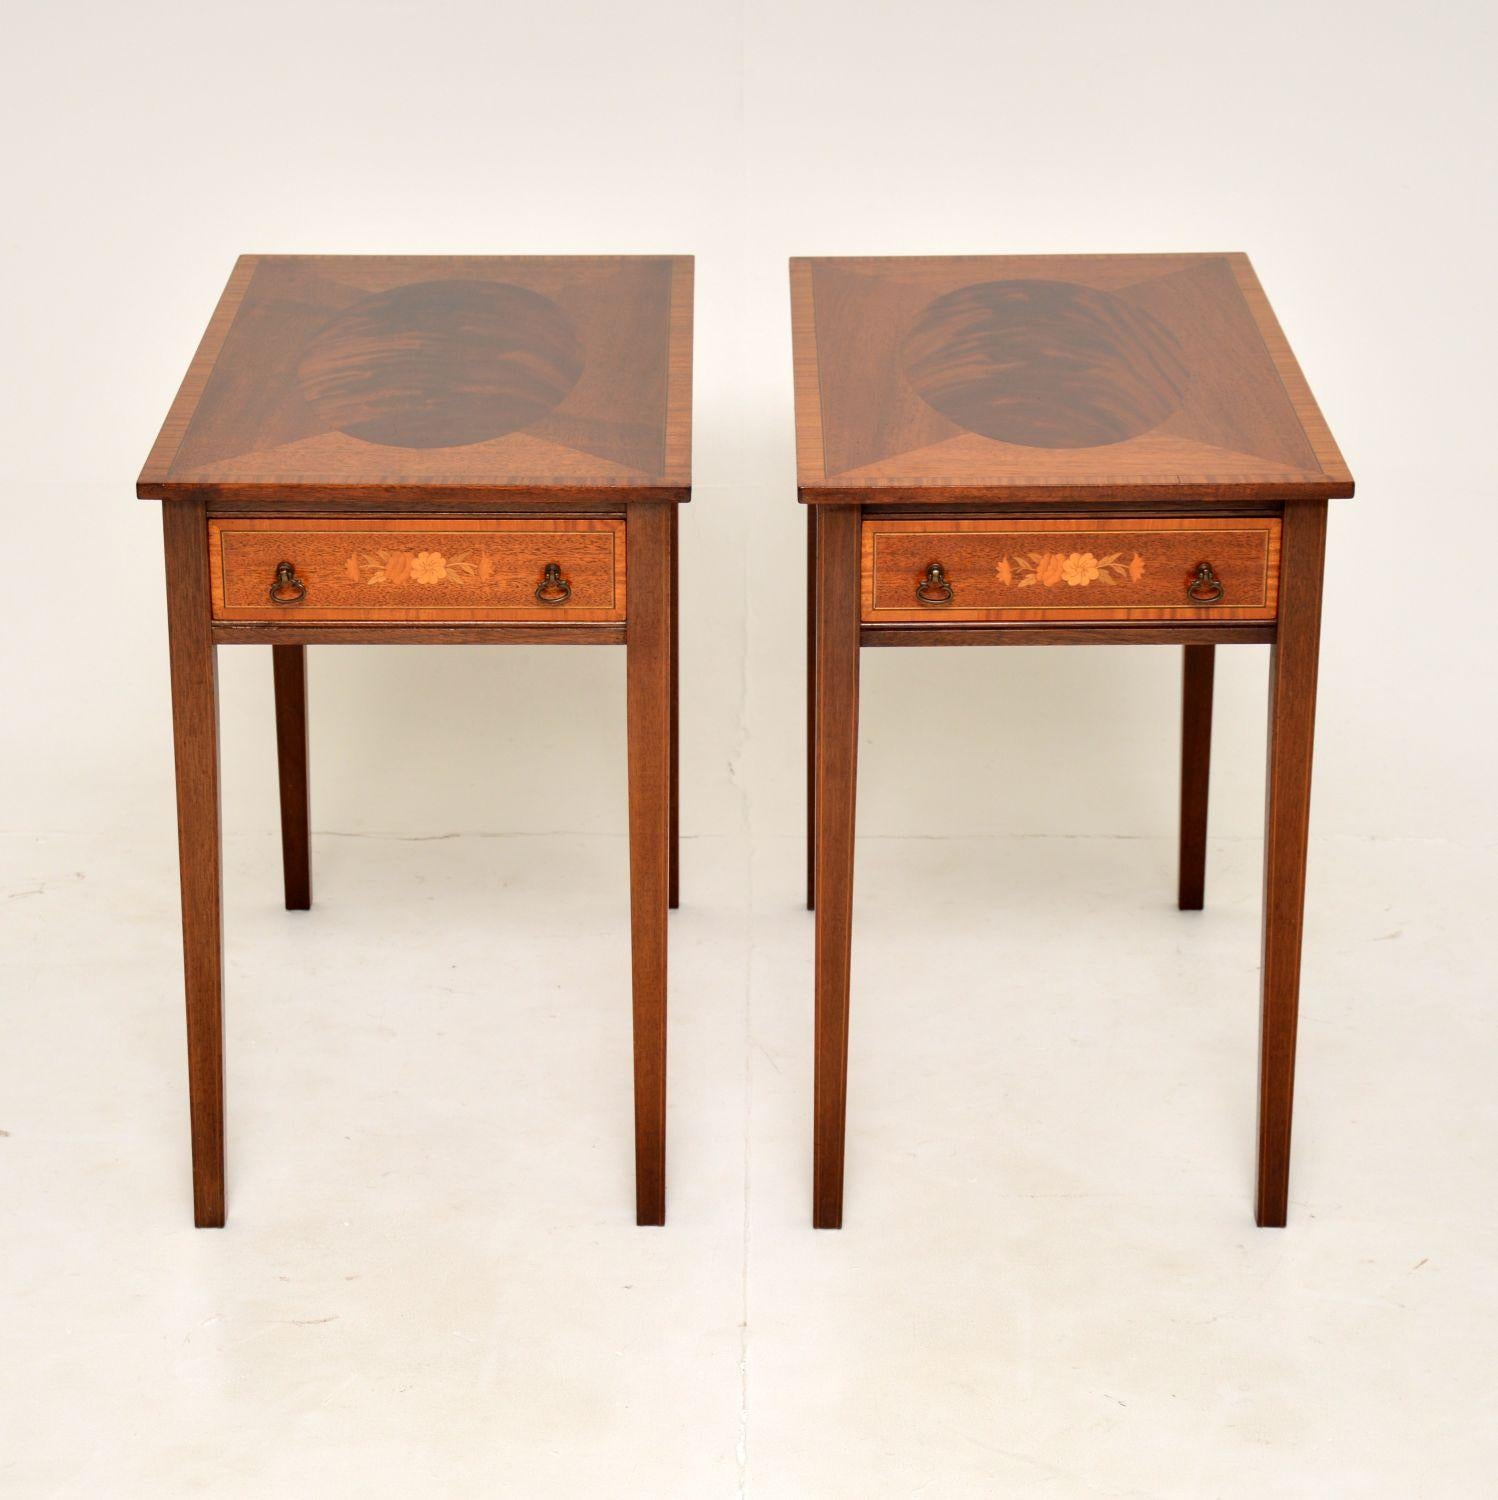 A beautiful pair of antique side tables. These were made in England, they date from around the 1950’s.

They are a very useful size, narrow and deep, perfect for use as end tables either side of a sofa. They are of super quality, constructed from